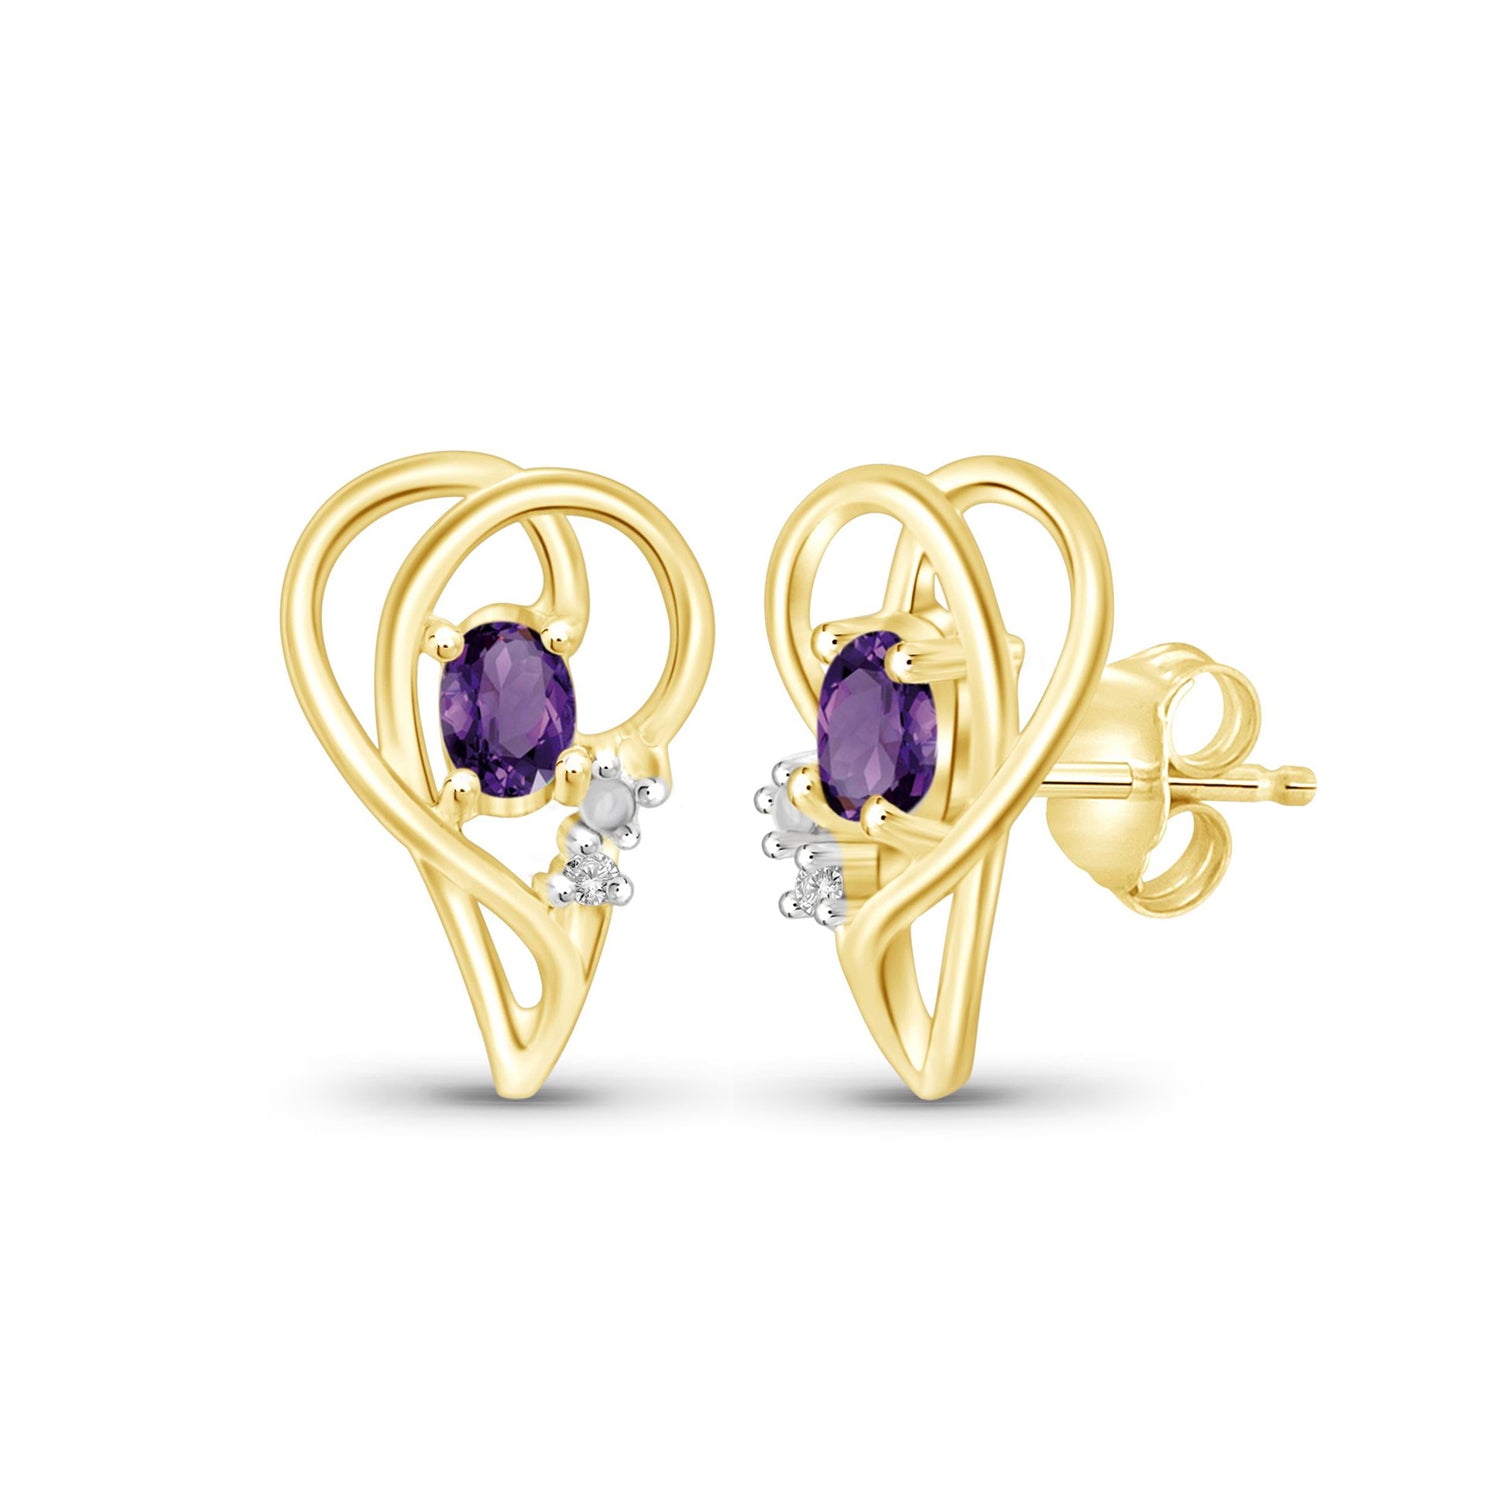 0.50 Carat T.G.W. Amethyst Gemstone and White Diamond Accent 14K Gold-Plated Earrings